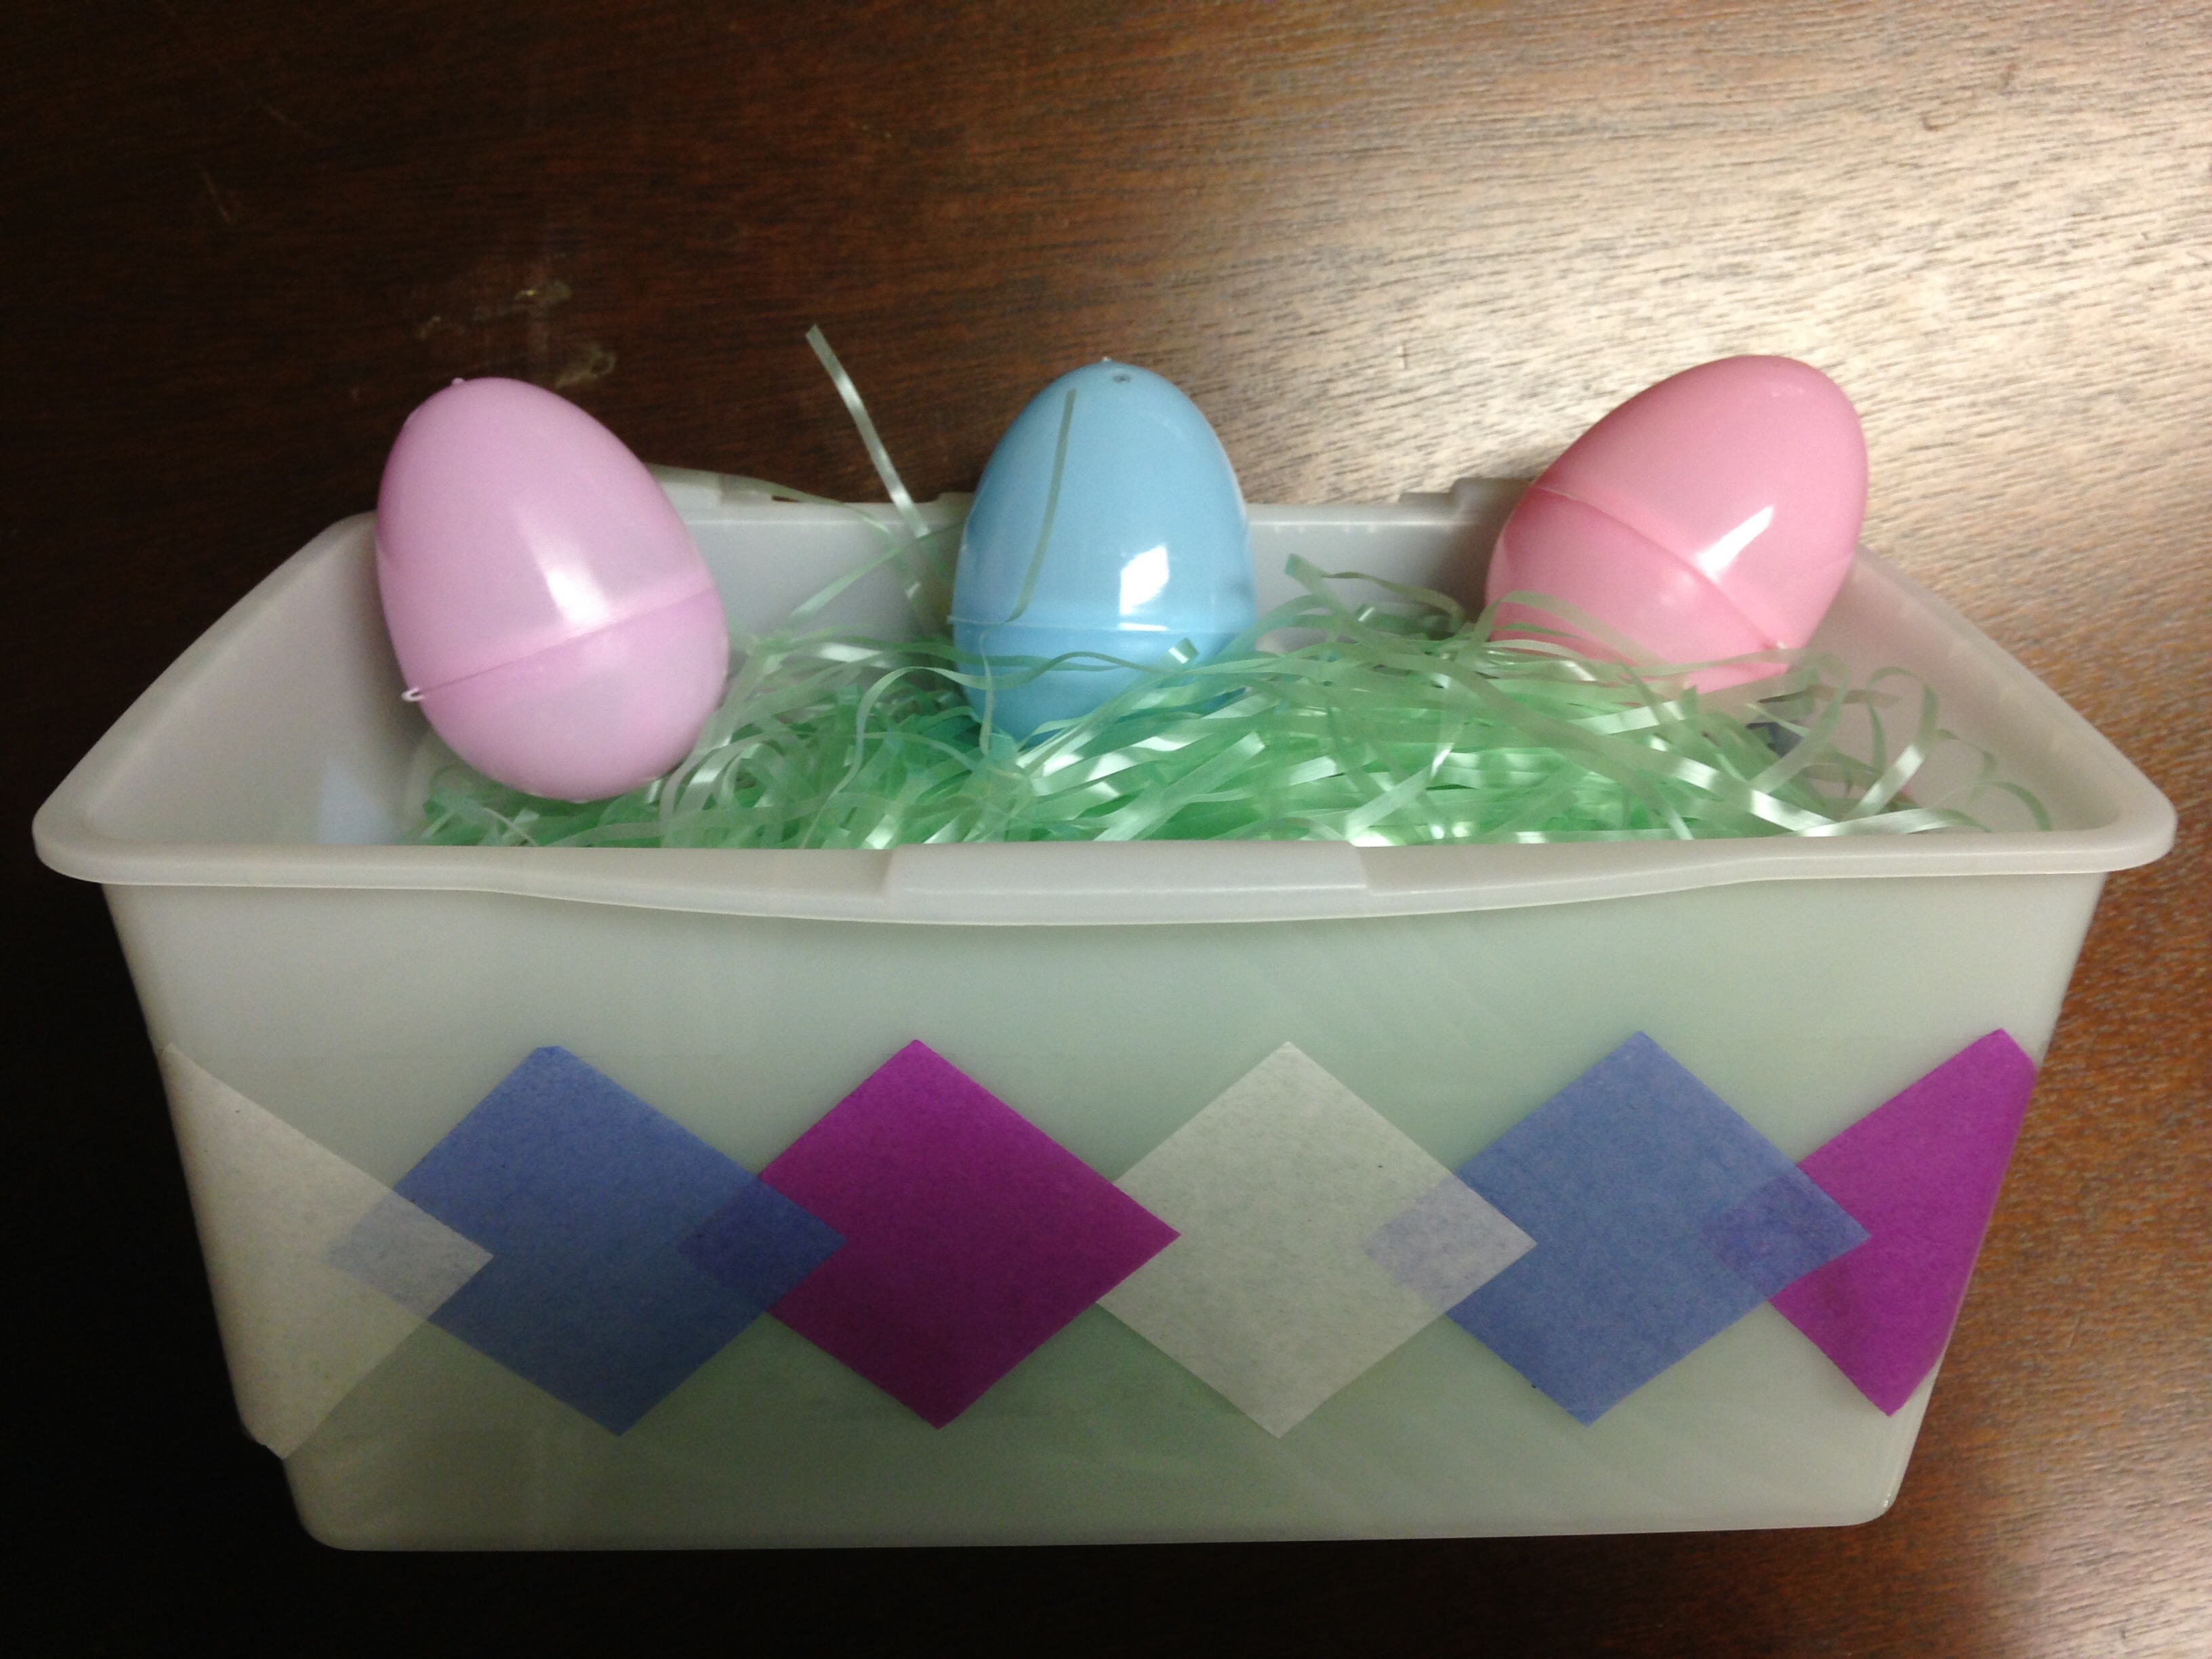 A fun, homemade egg basket from a wipes box, contact paper, and tissue paper! More great ideas at the Bitty-Bits Blog!